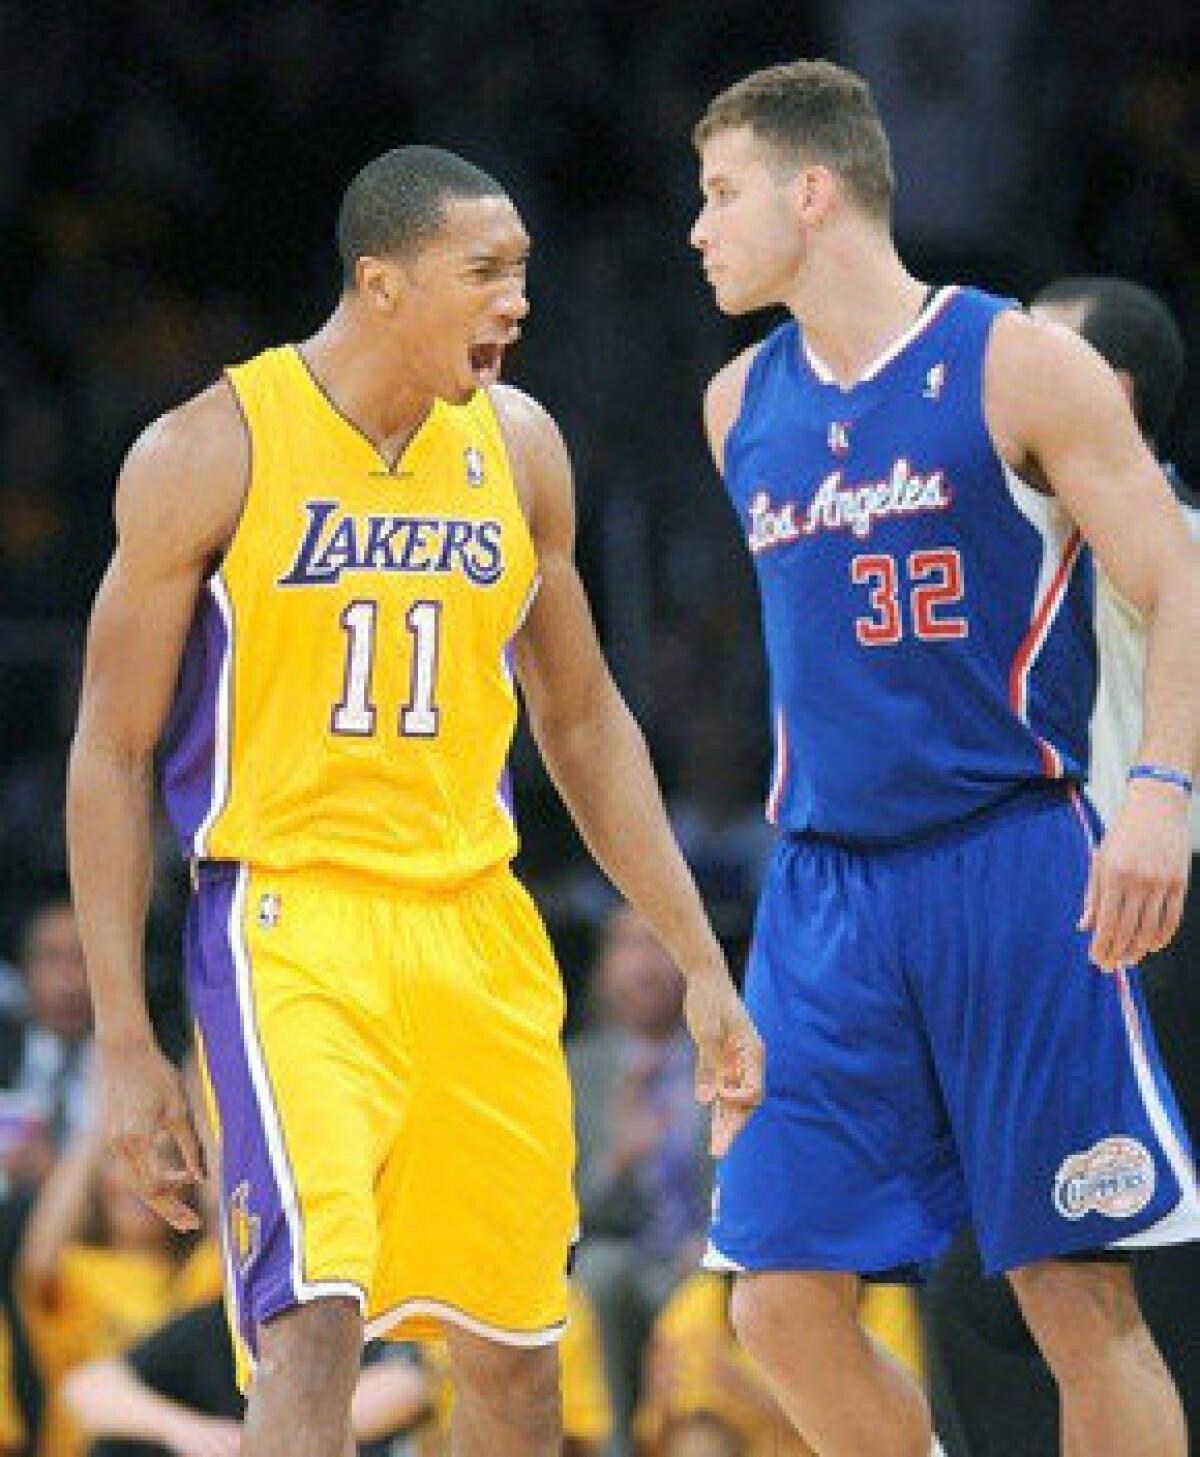 Wesley Johnson, left, celebrates in front of Blake Griffin after hitting a three-pointer during the Lakers' 116-103 season-opening victory over the Clippers.